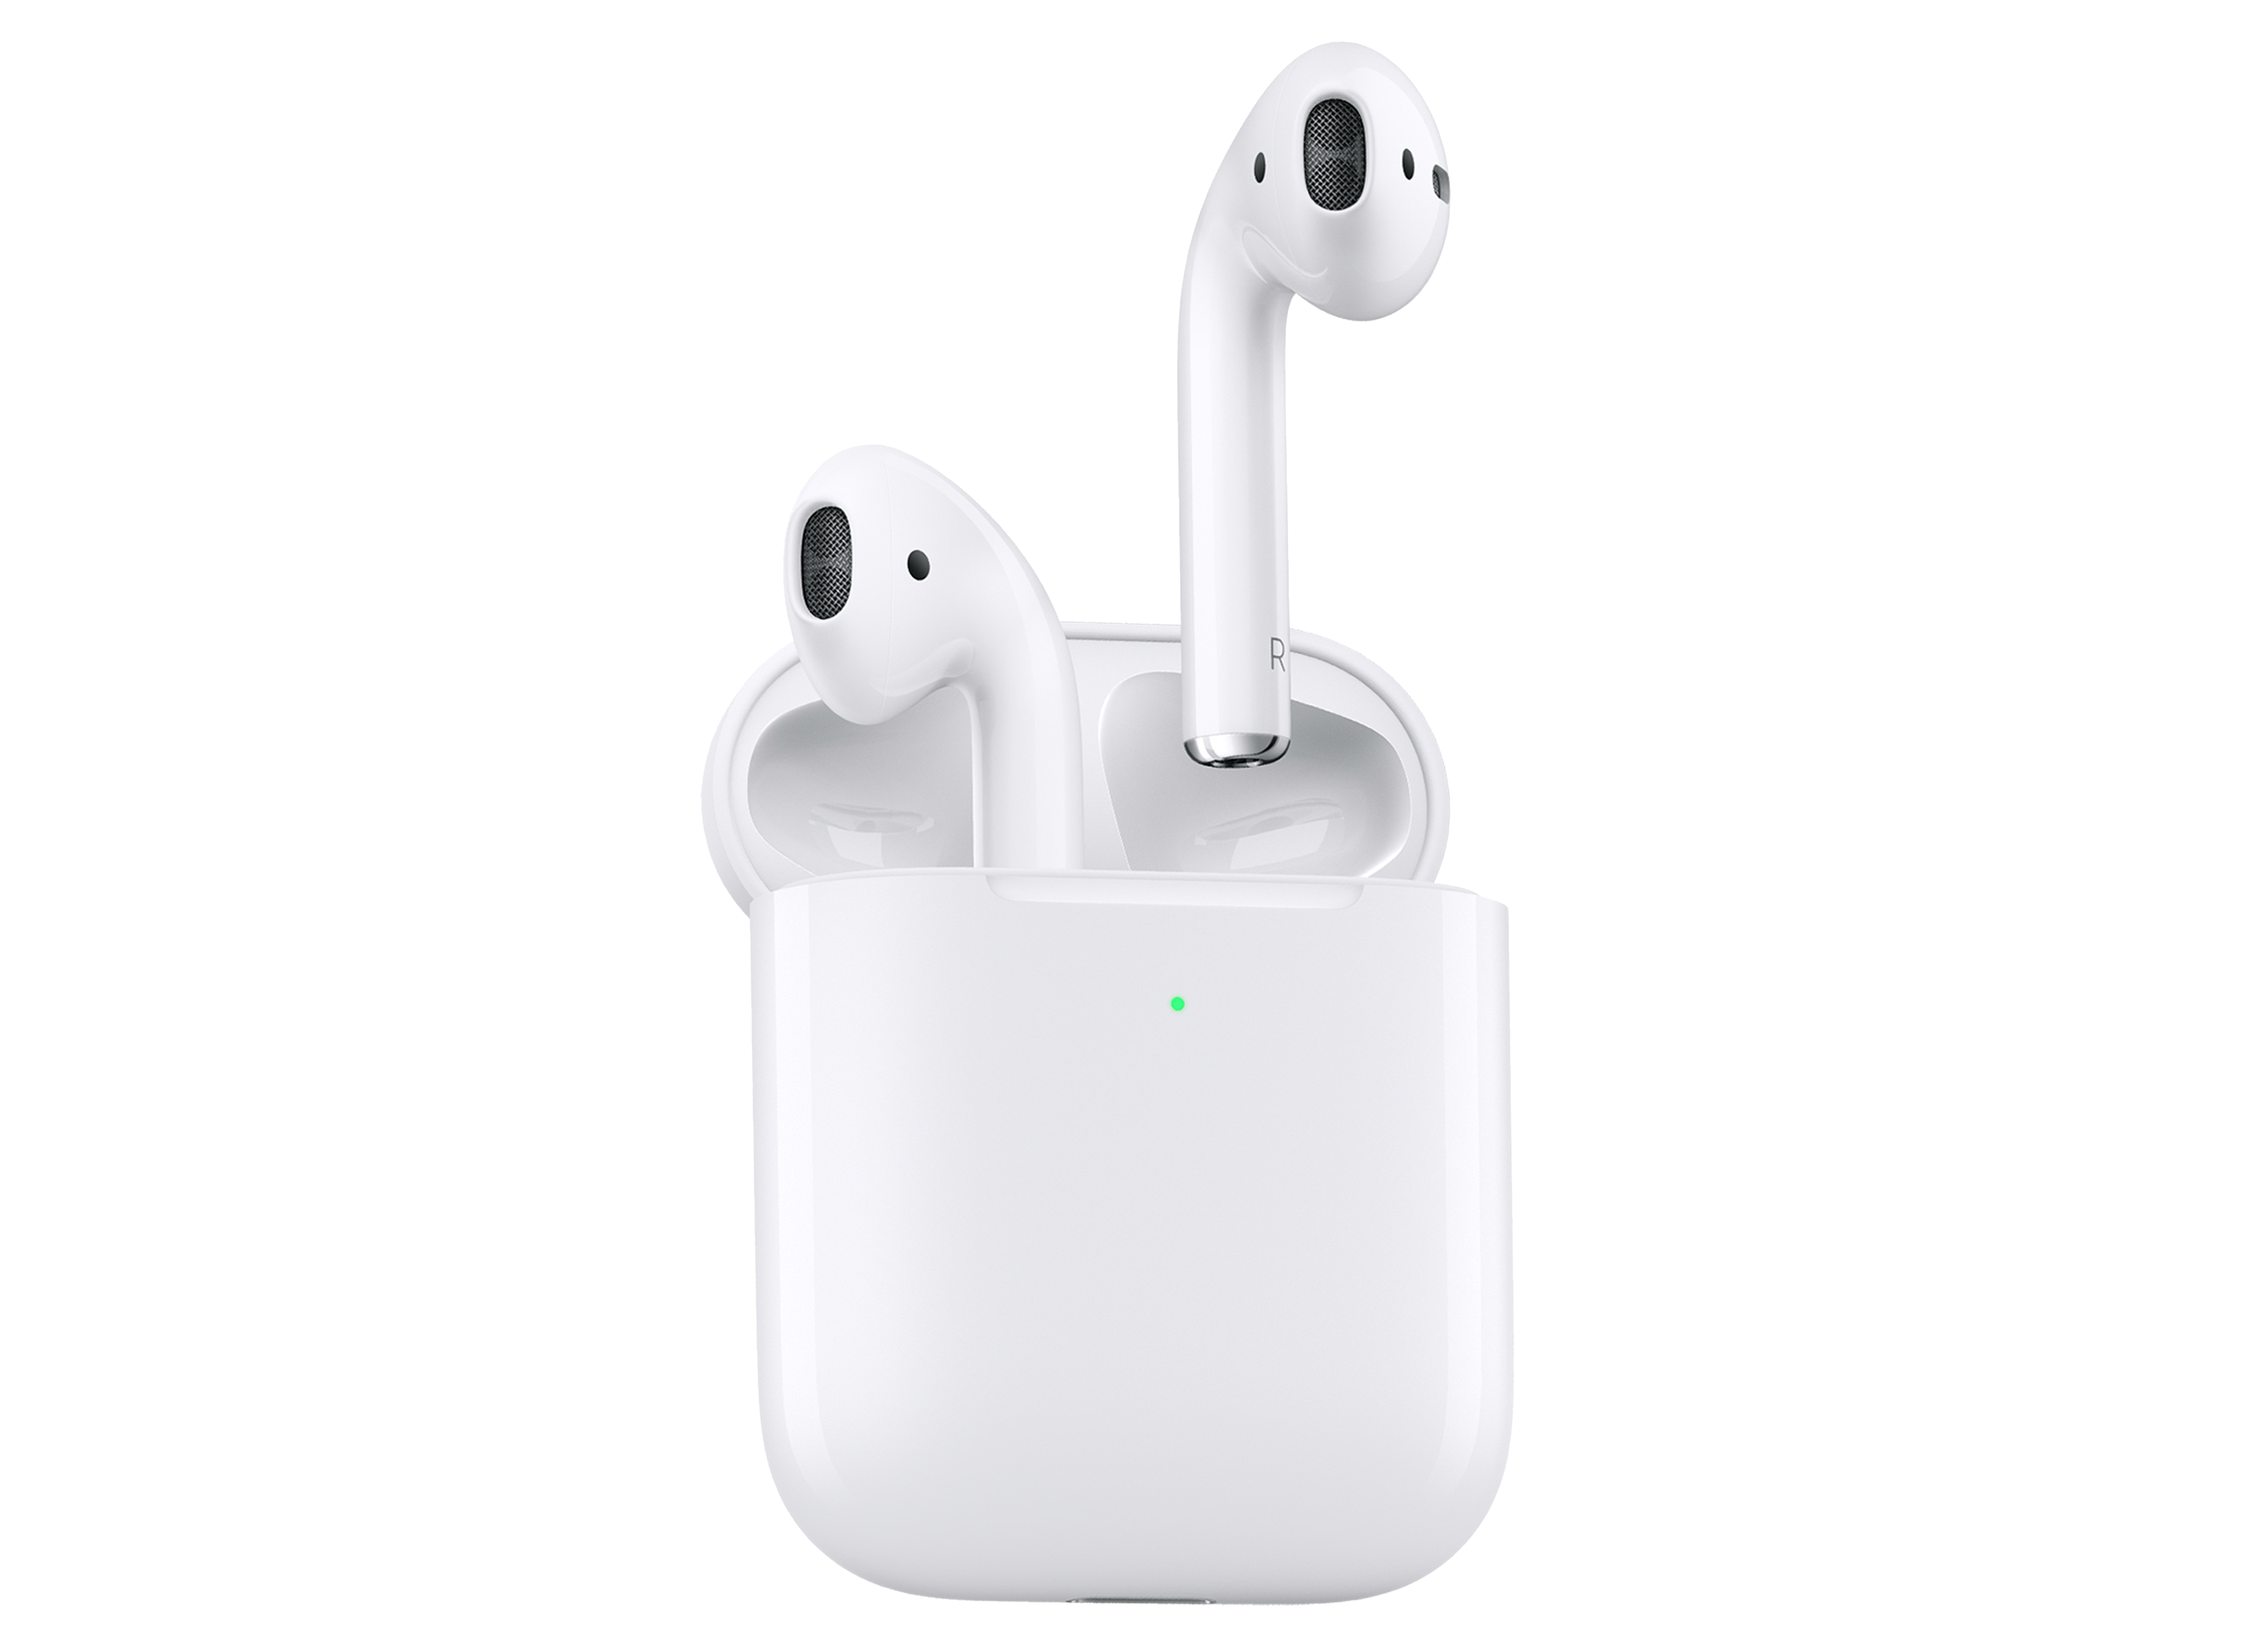 morder ly Kano Apple AirPods (2nd Gen) with Wireless Charging Case Headphone Review -  Consumer Reports